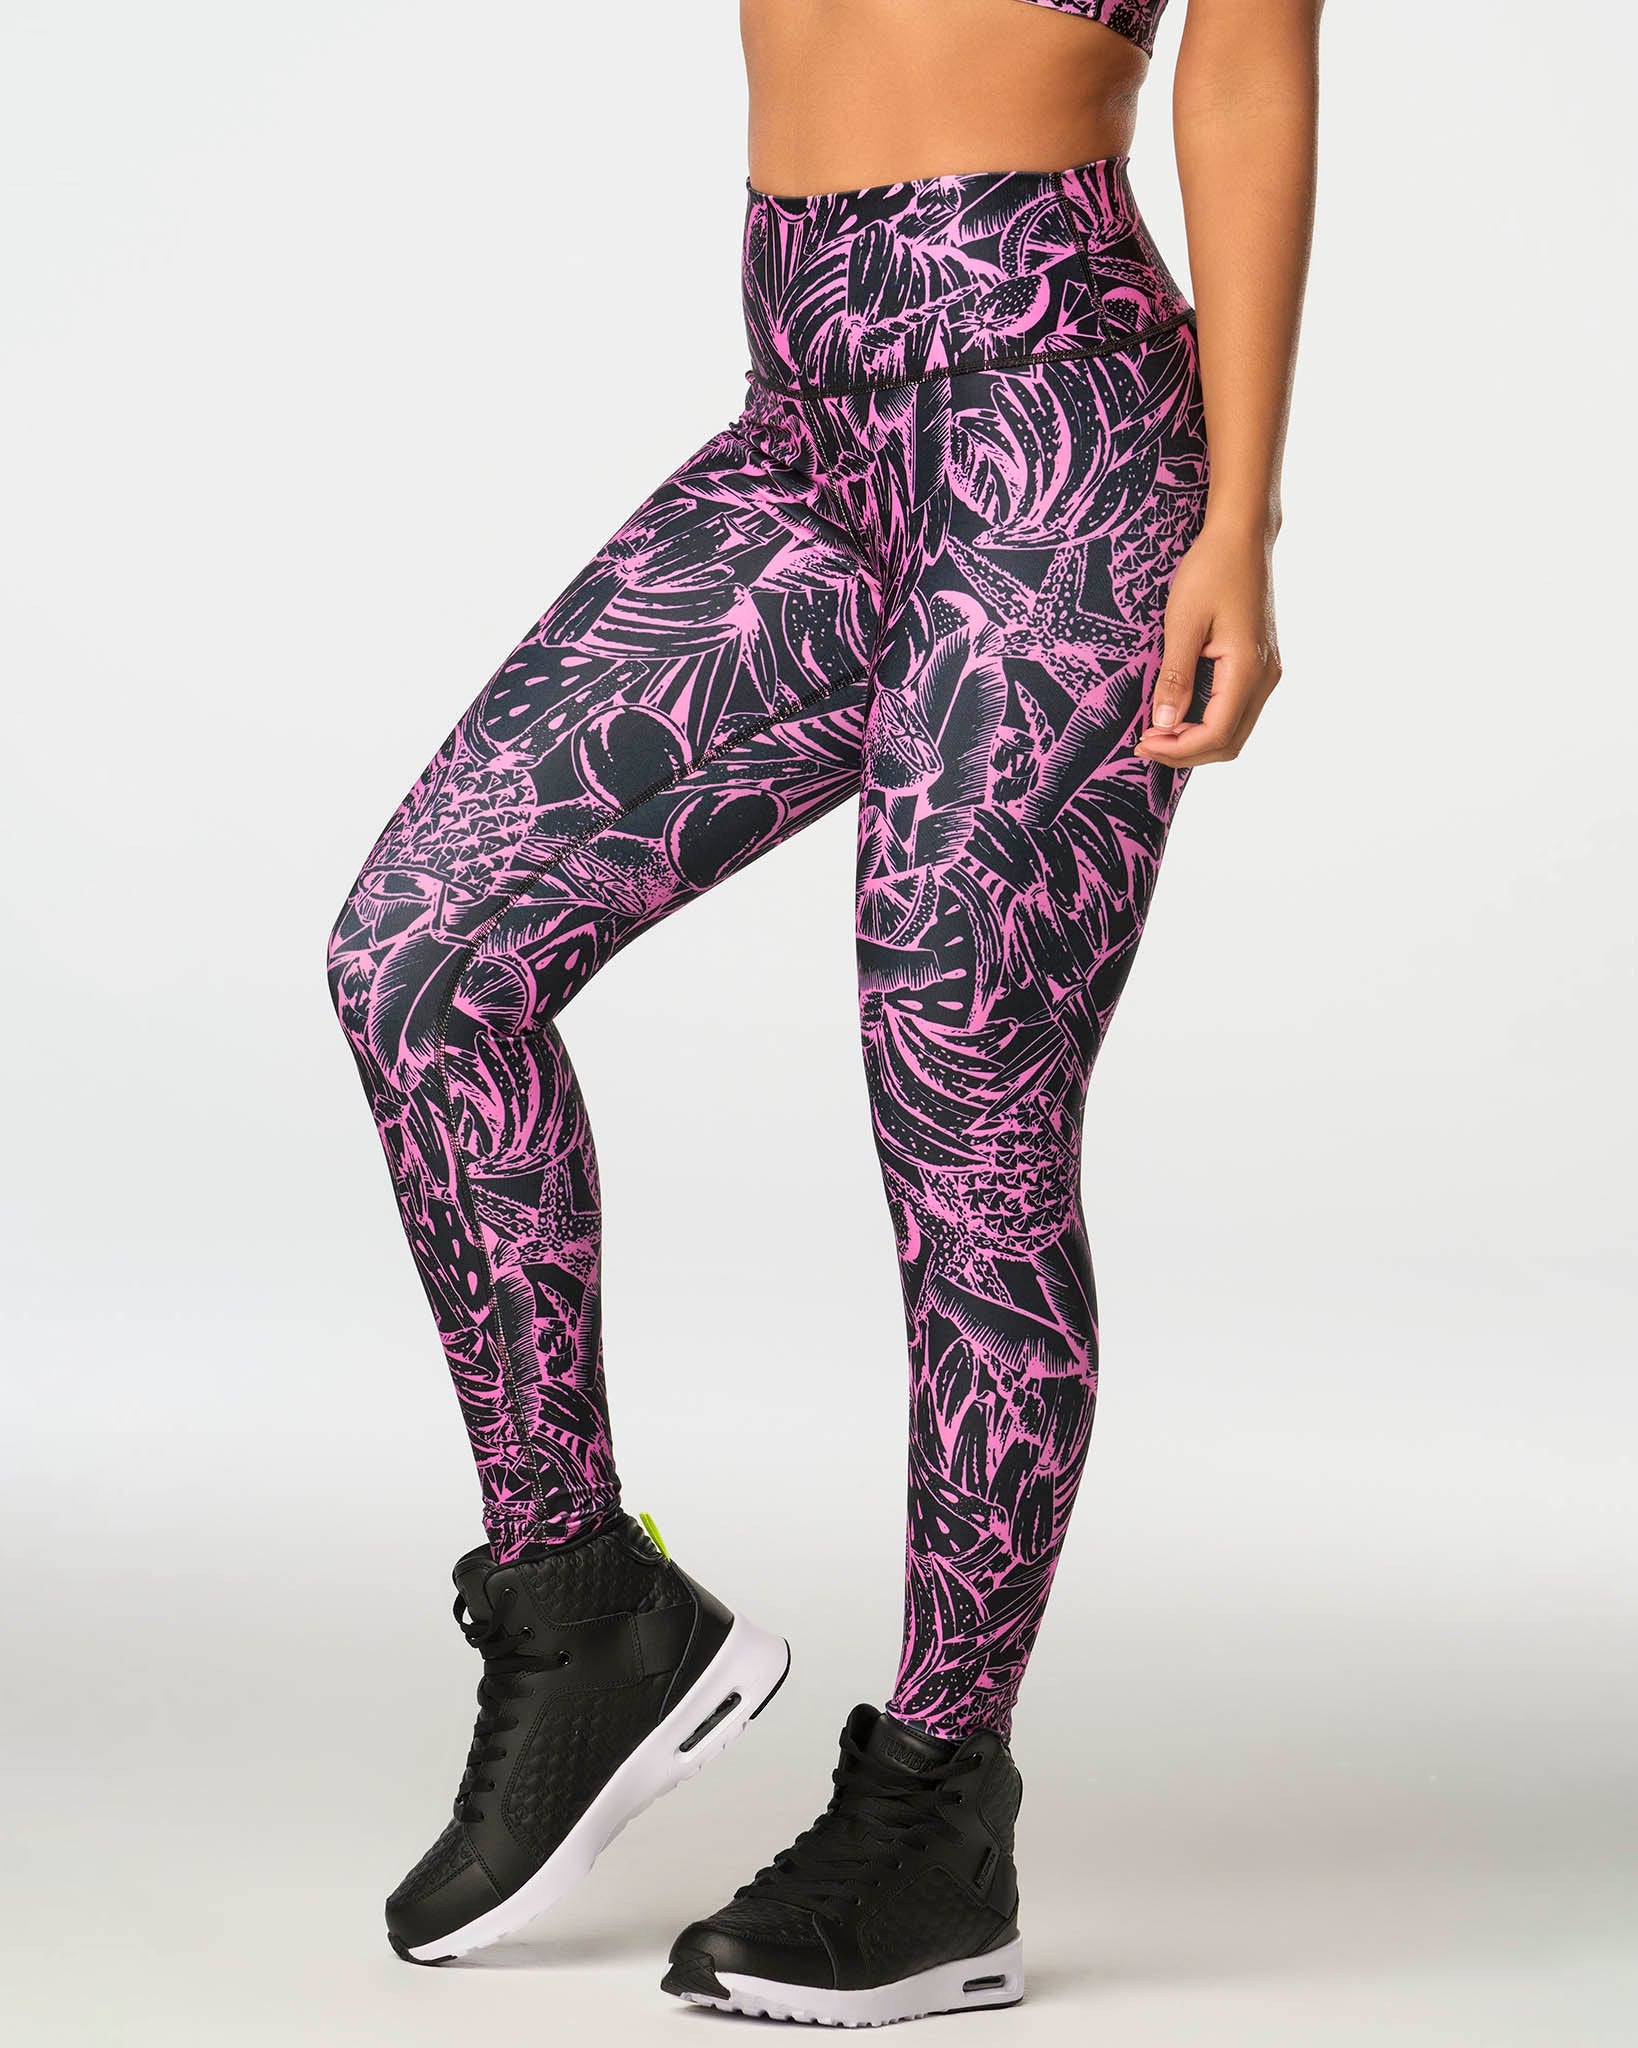 Shine Bright in Zumba Butterfly High Waisted Leggings - Ankle Length, Slim  Fit, Maximum Compression, Z-Dri™ Technology